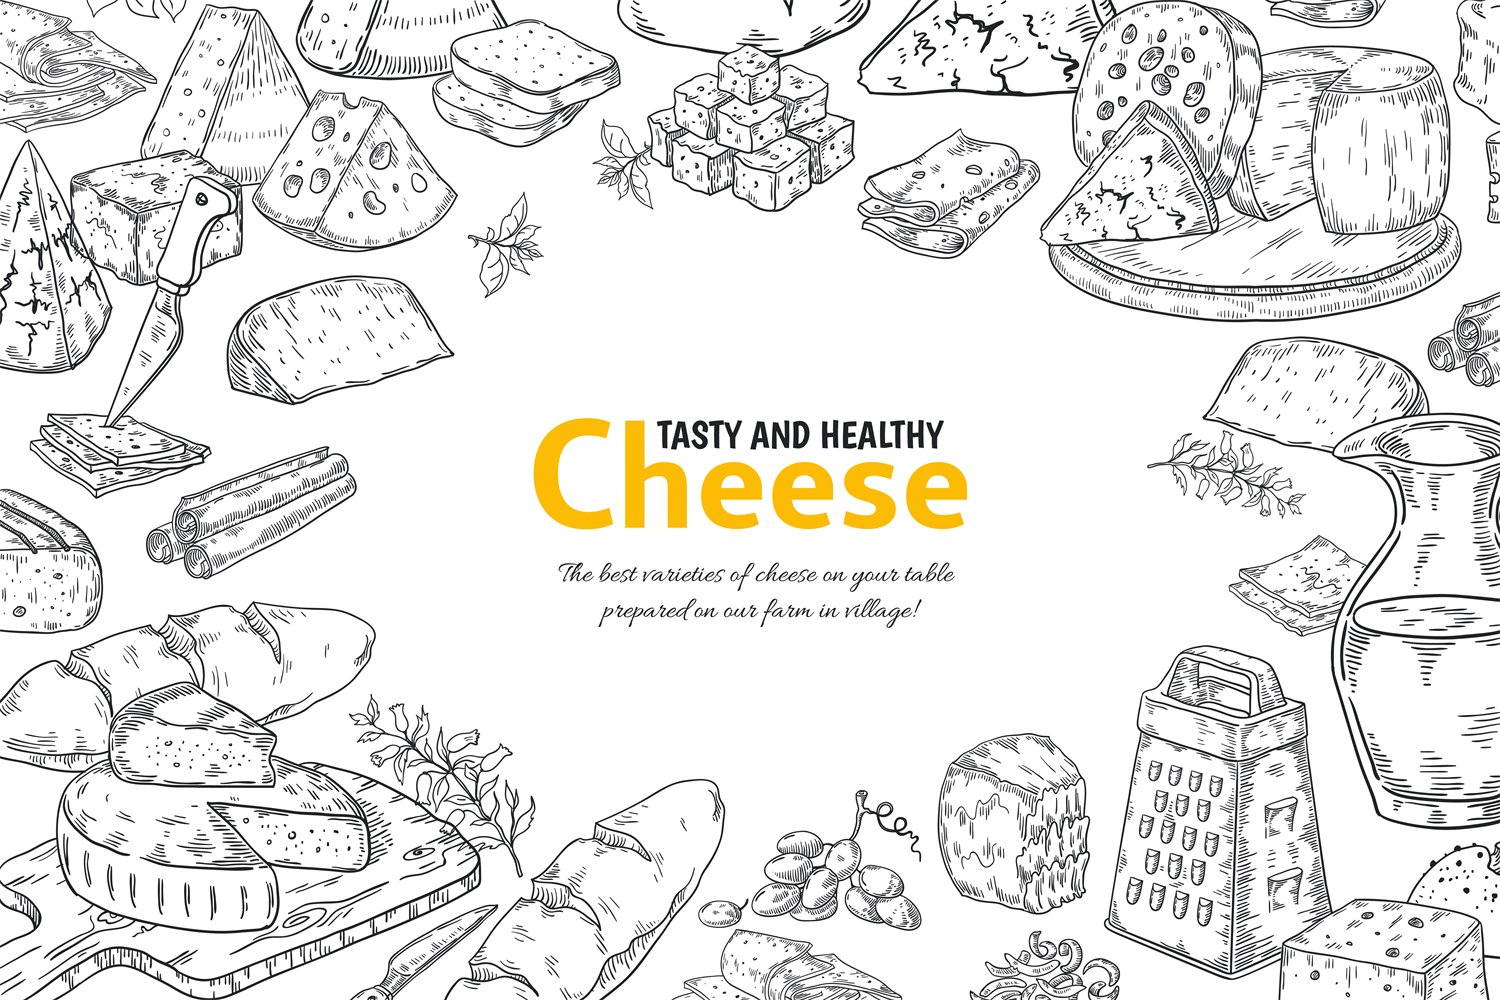 Background image of hard cheese and Italian snacks hand drawn in pencil.